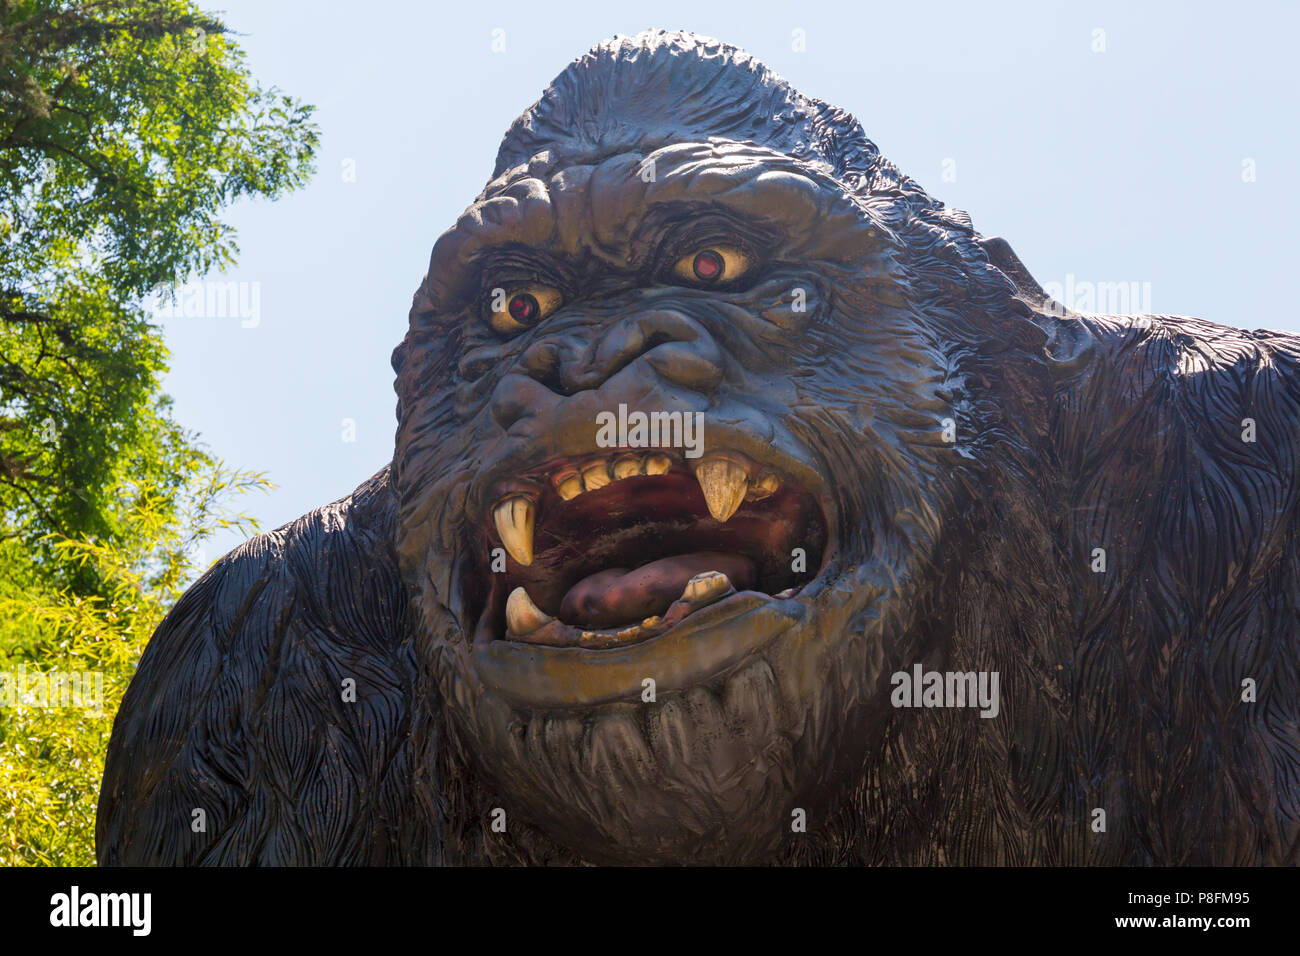 King Kong in the Prehistoric Dinosaur Valley at Wookey Hole, Wells, Somerset, UK in July Stock Photo